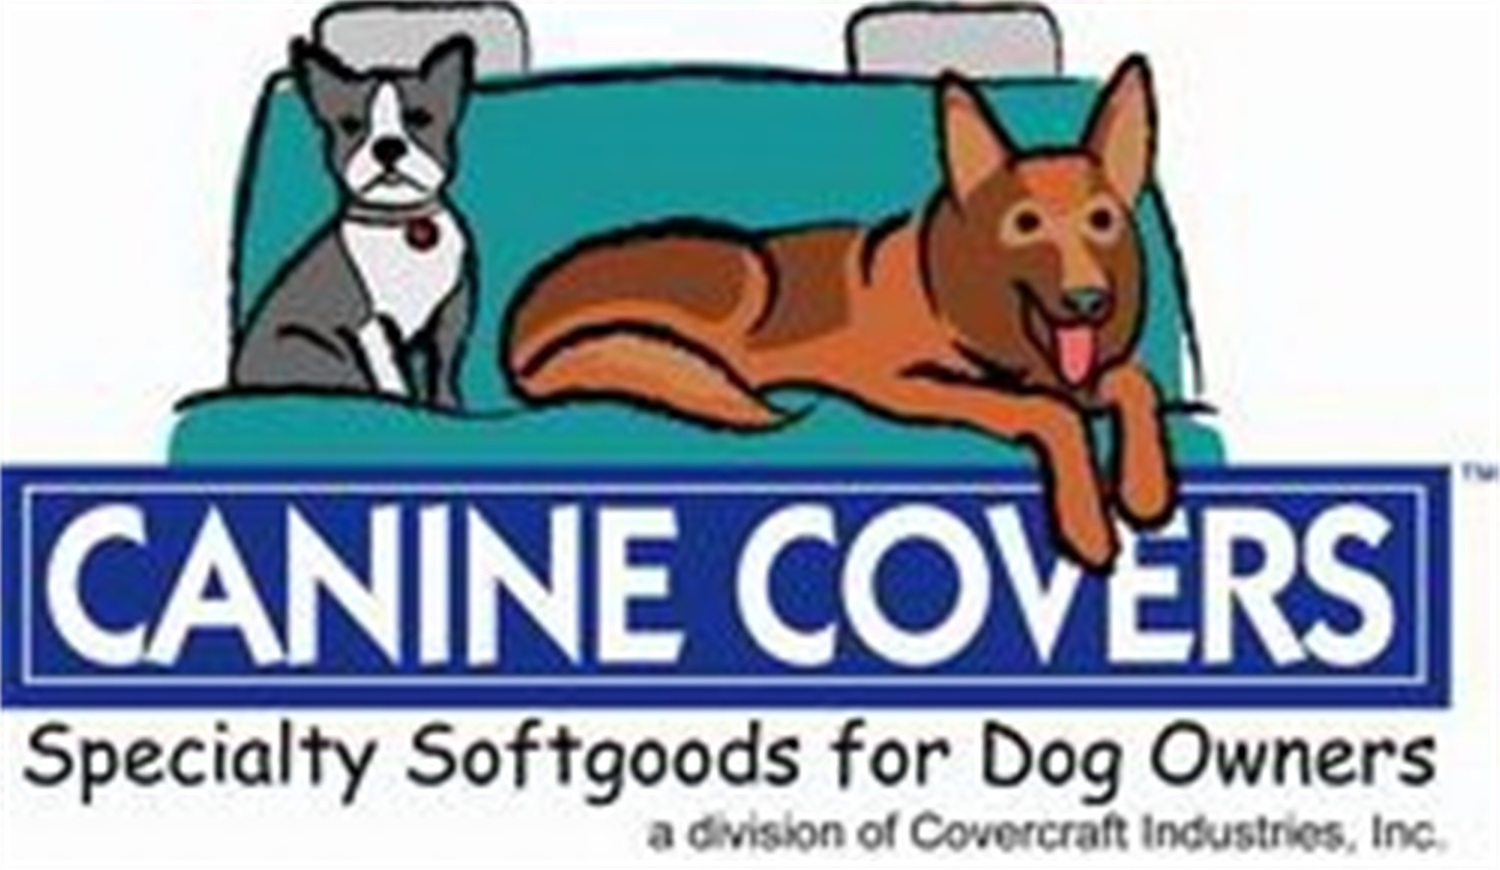 Canine Covers